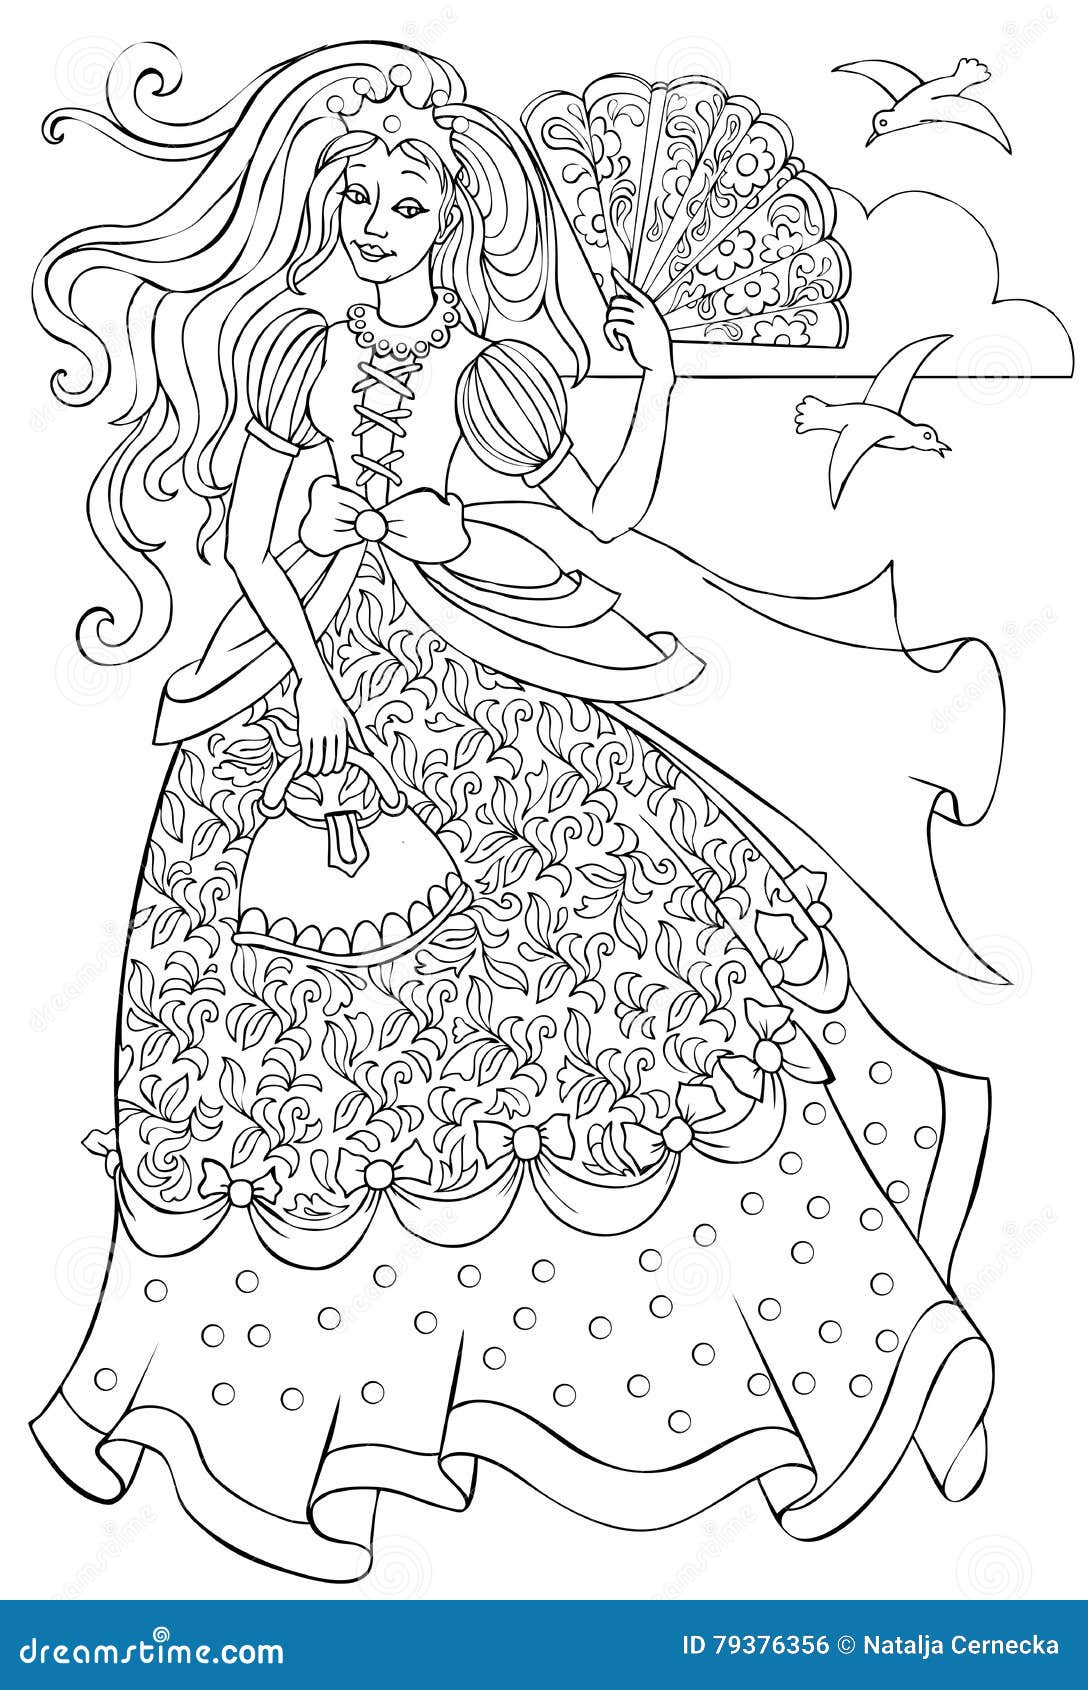 Black and White Illustration of Beautiful Princess for Coloring. Stock ...